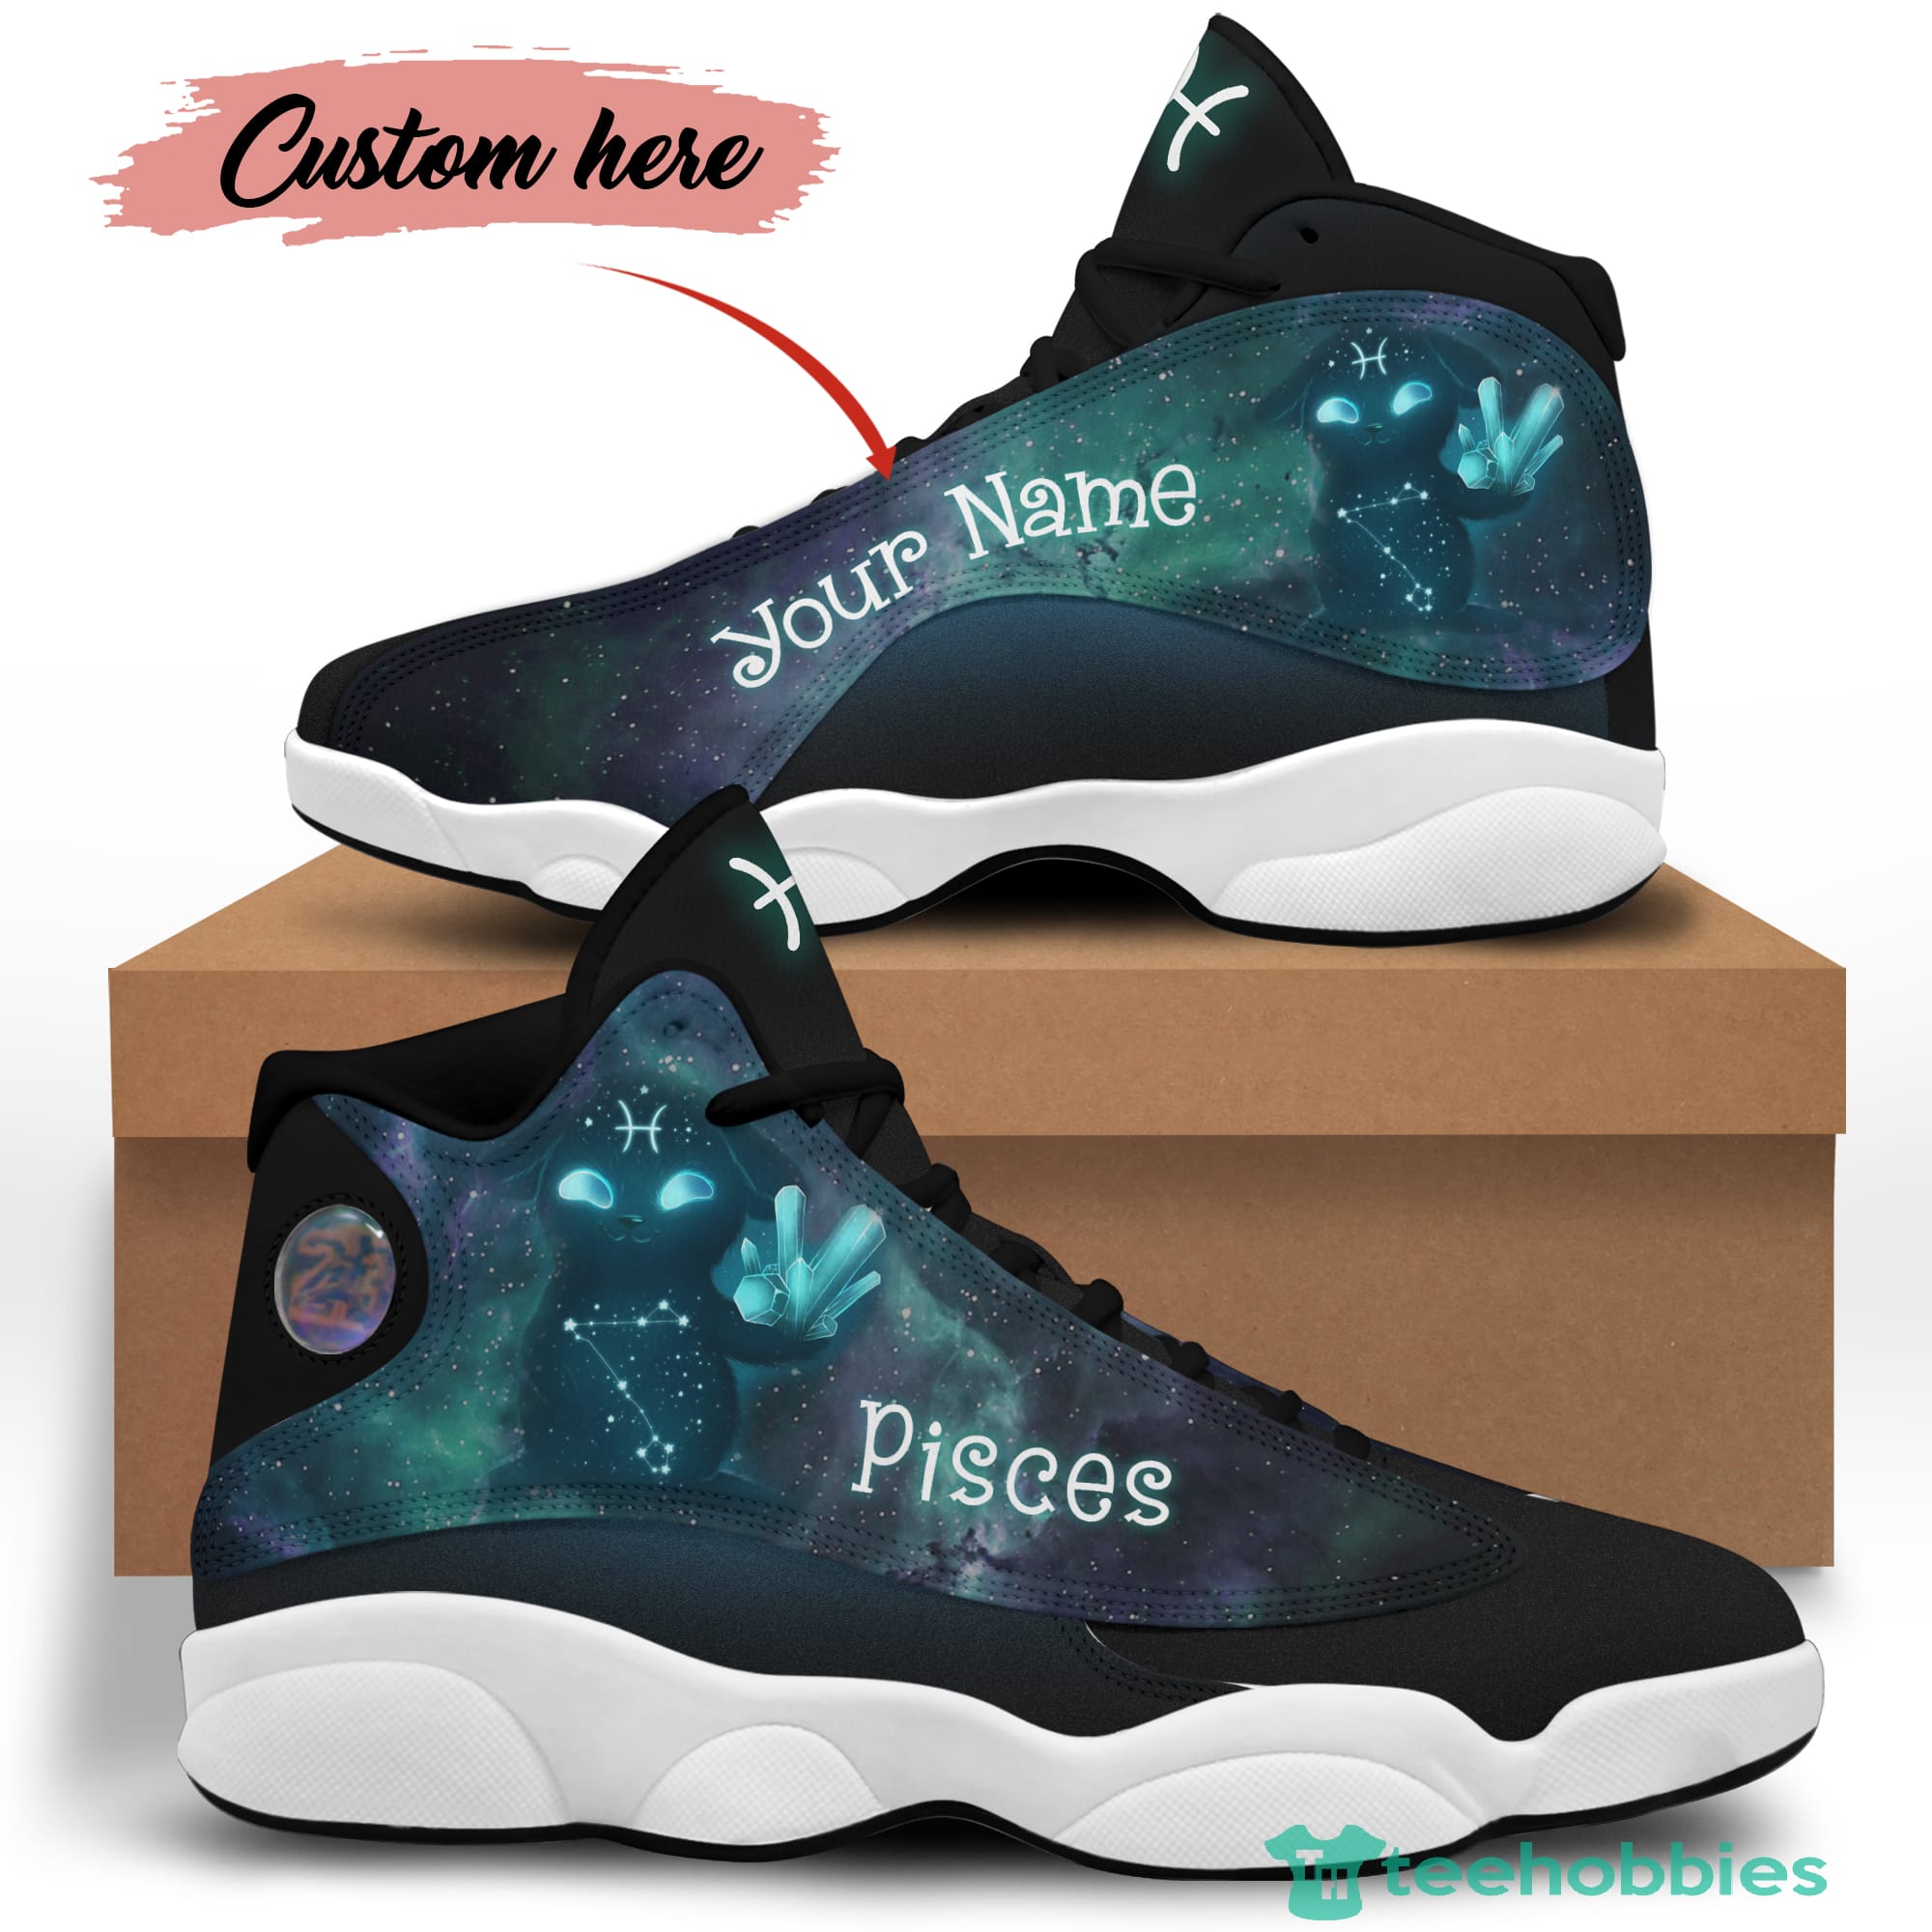 Pisces Birthday Gift Personalized Name Air Jordan 13 Shoes SKU268